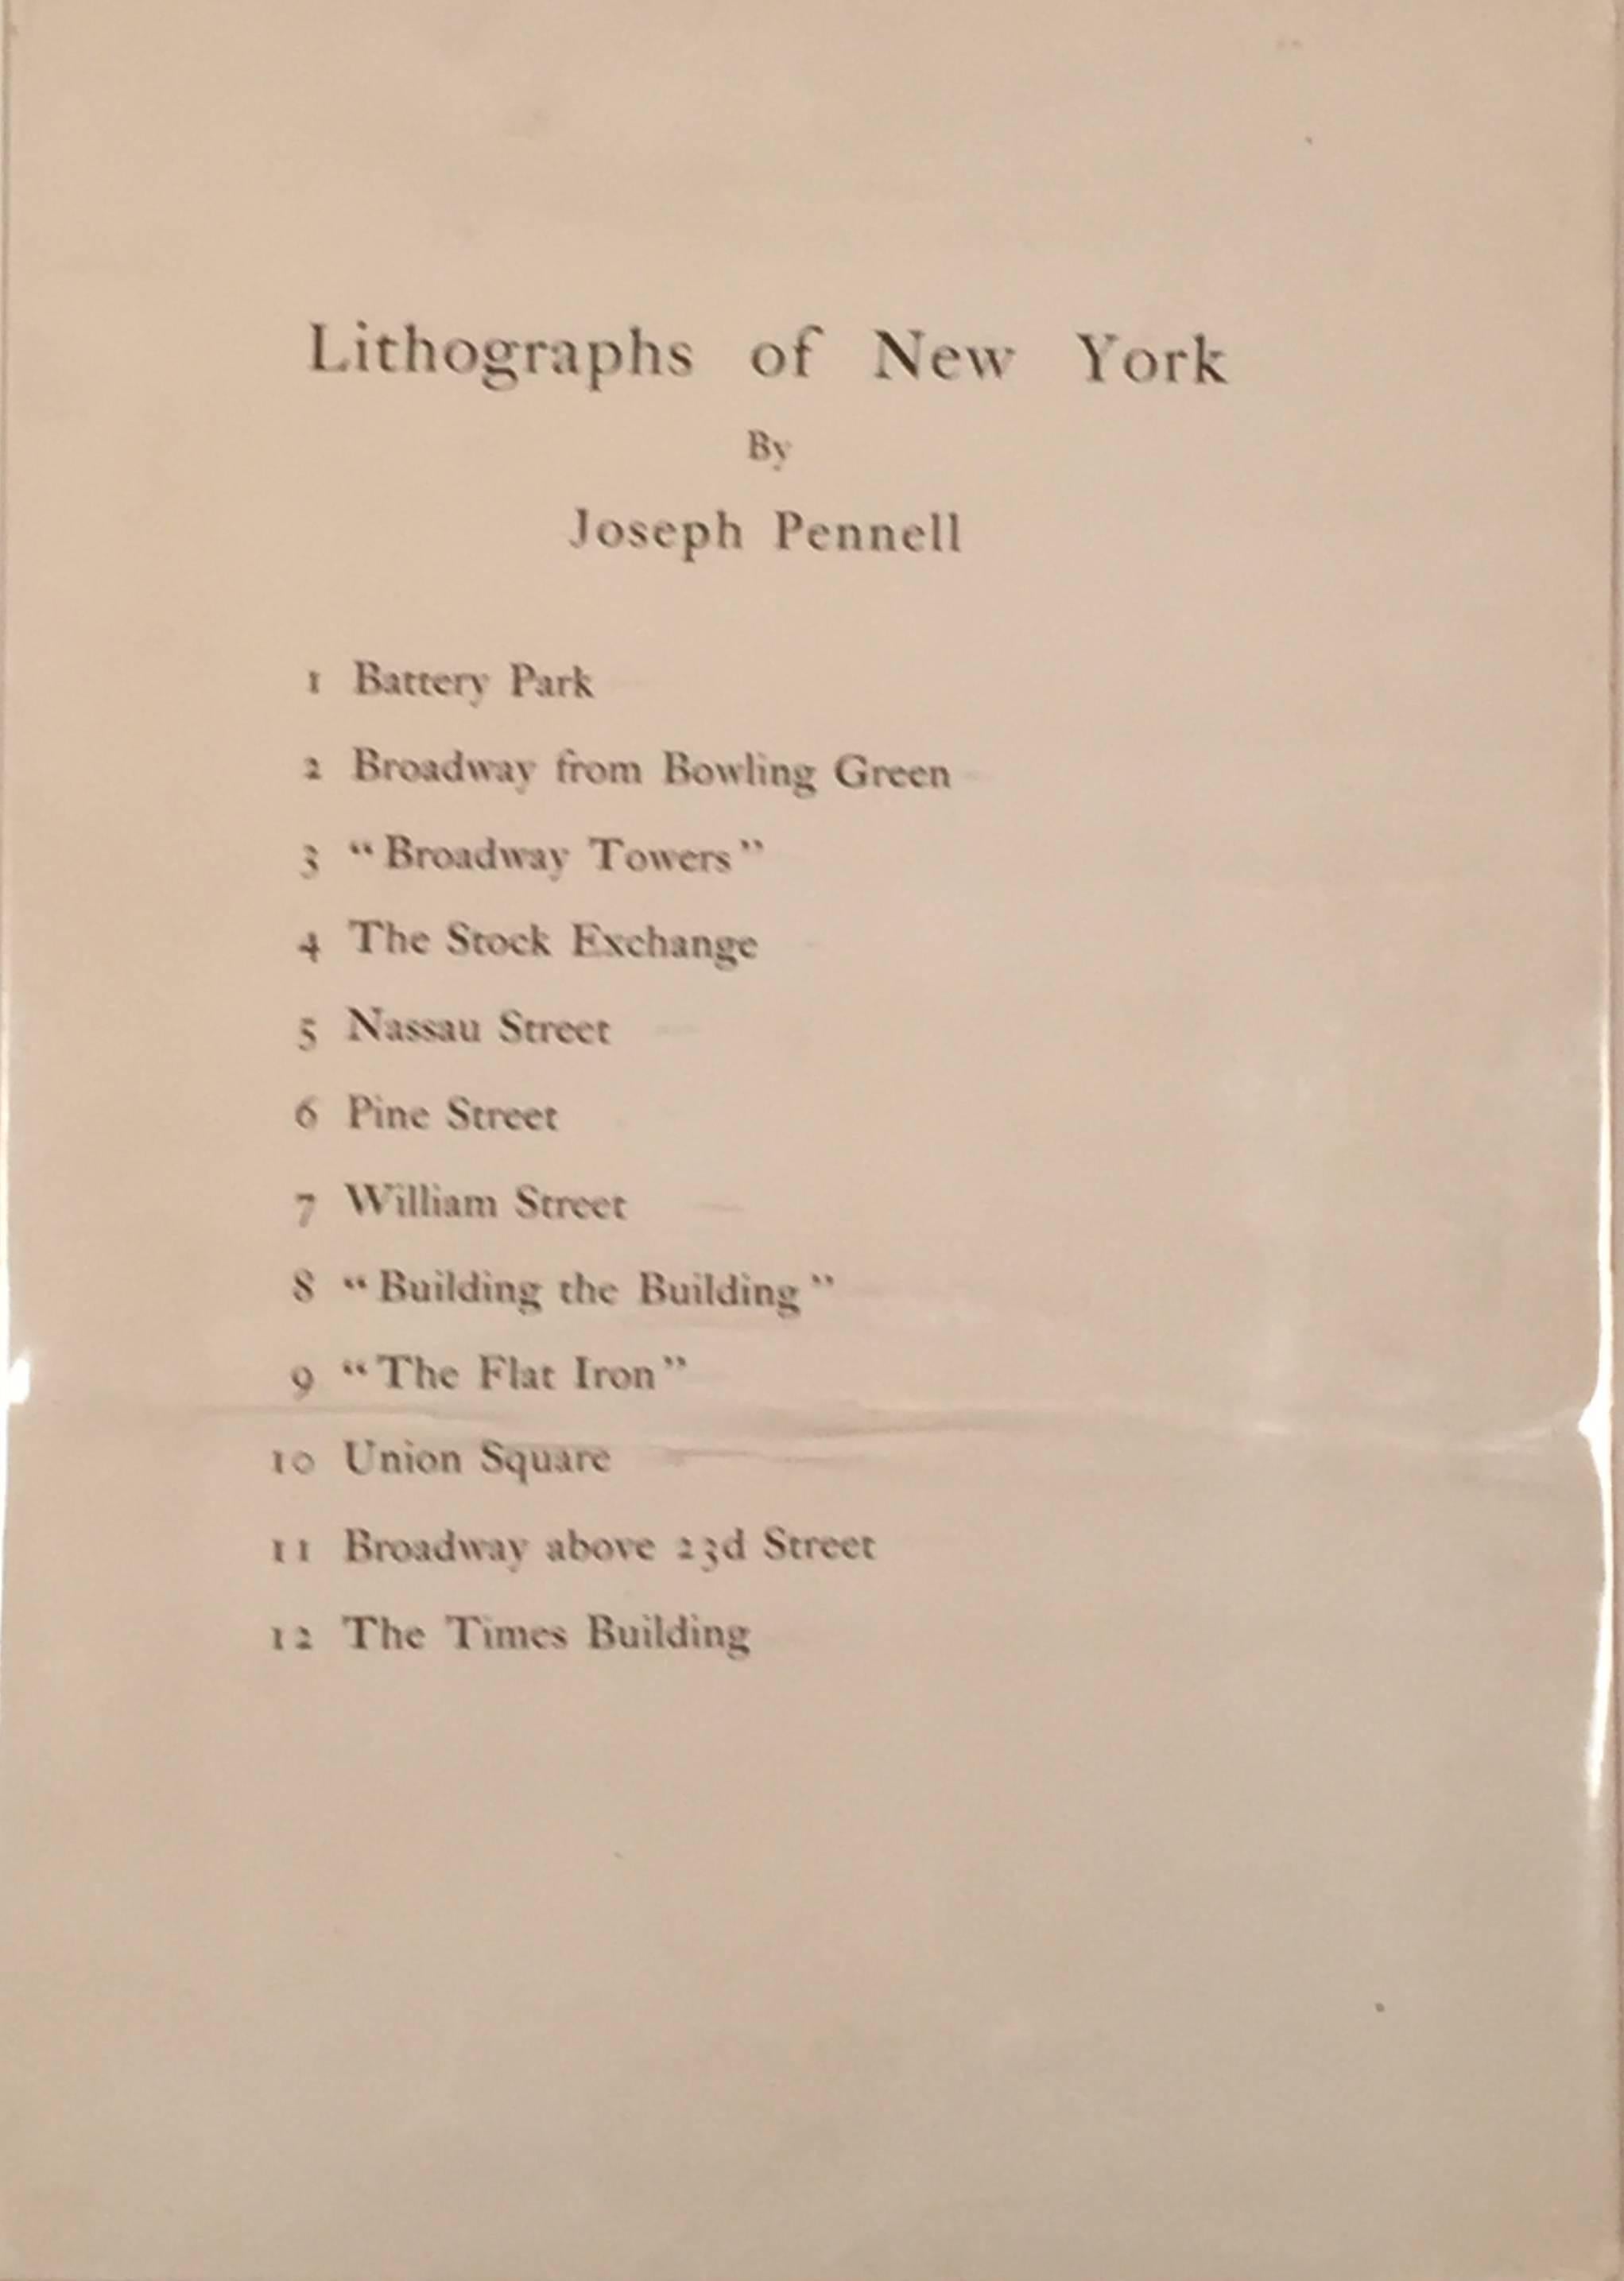 LITHOGRAPHS OF NEW YORK 4